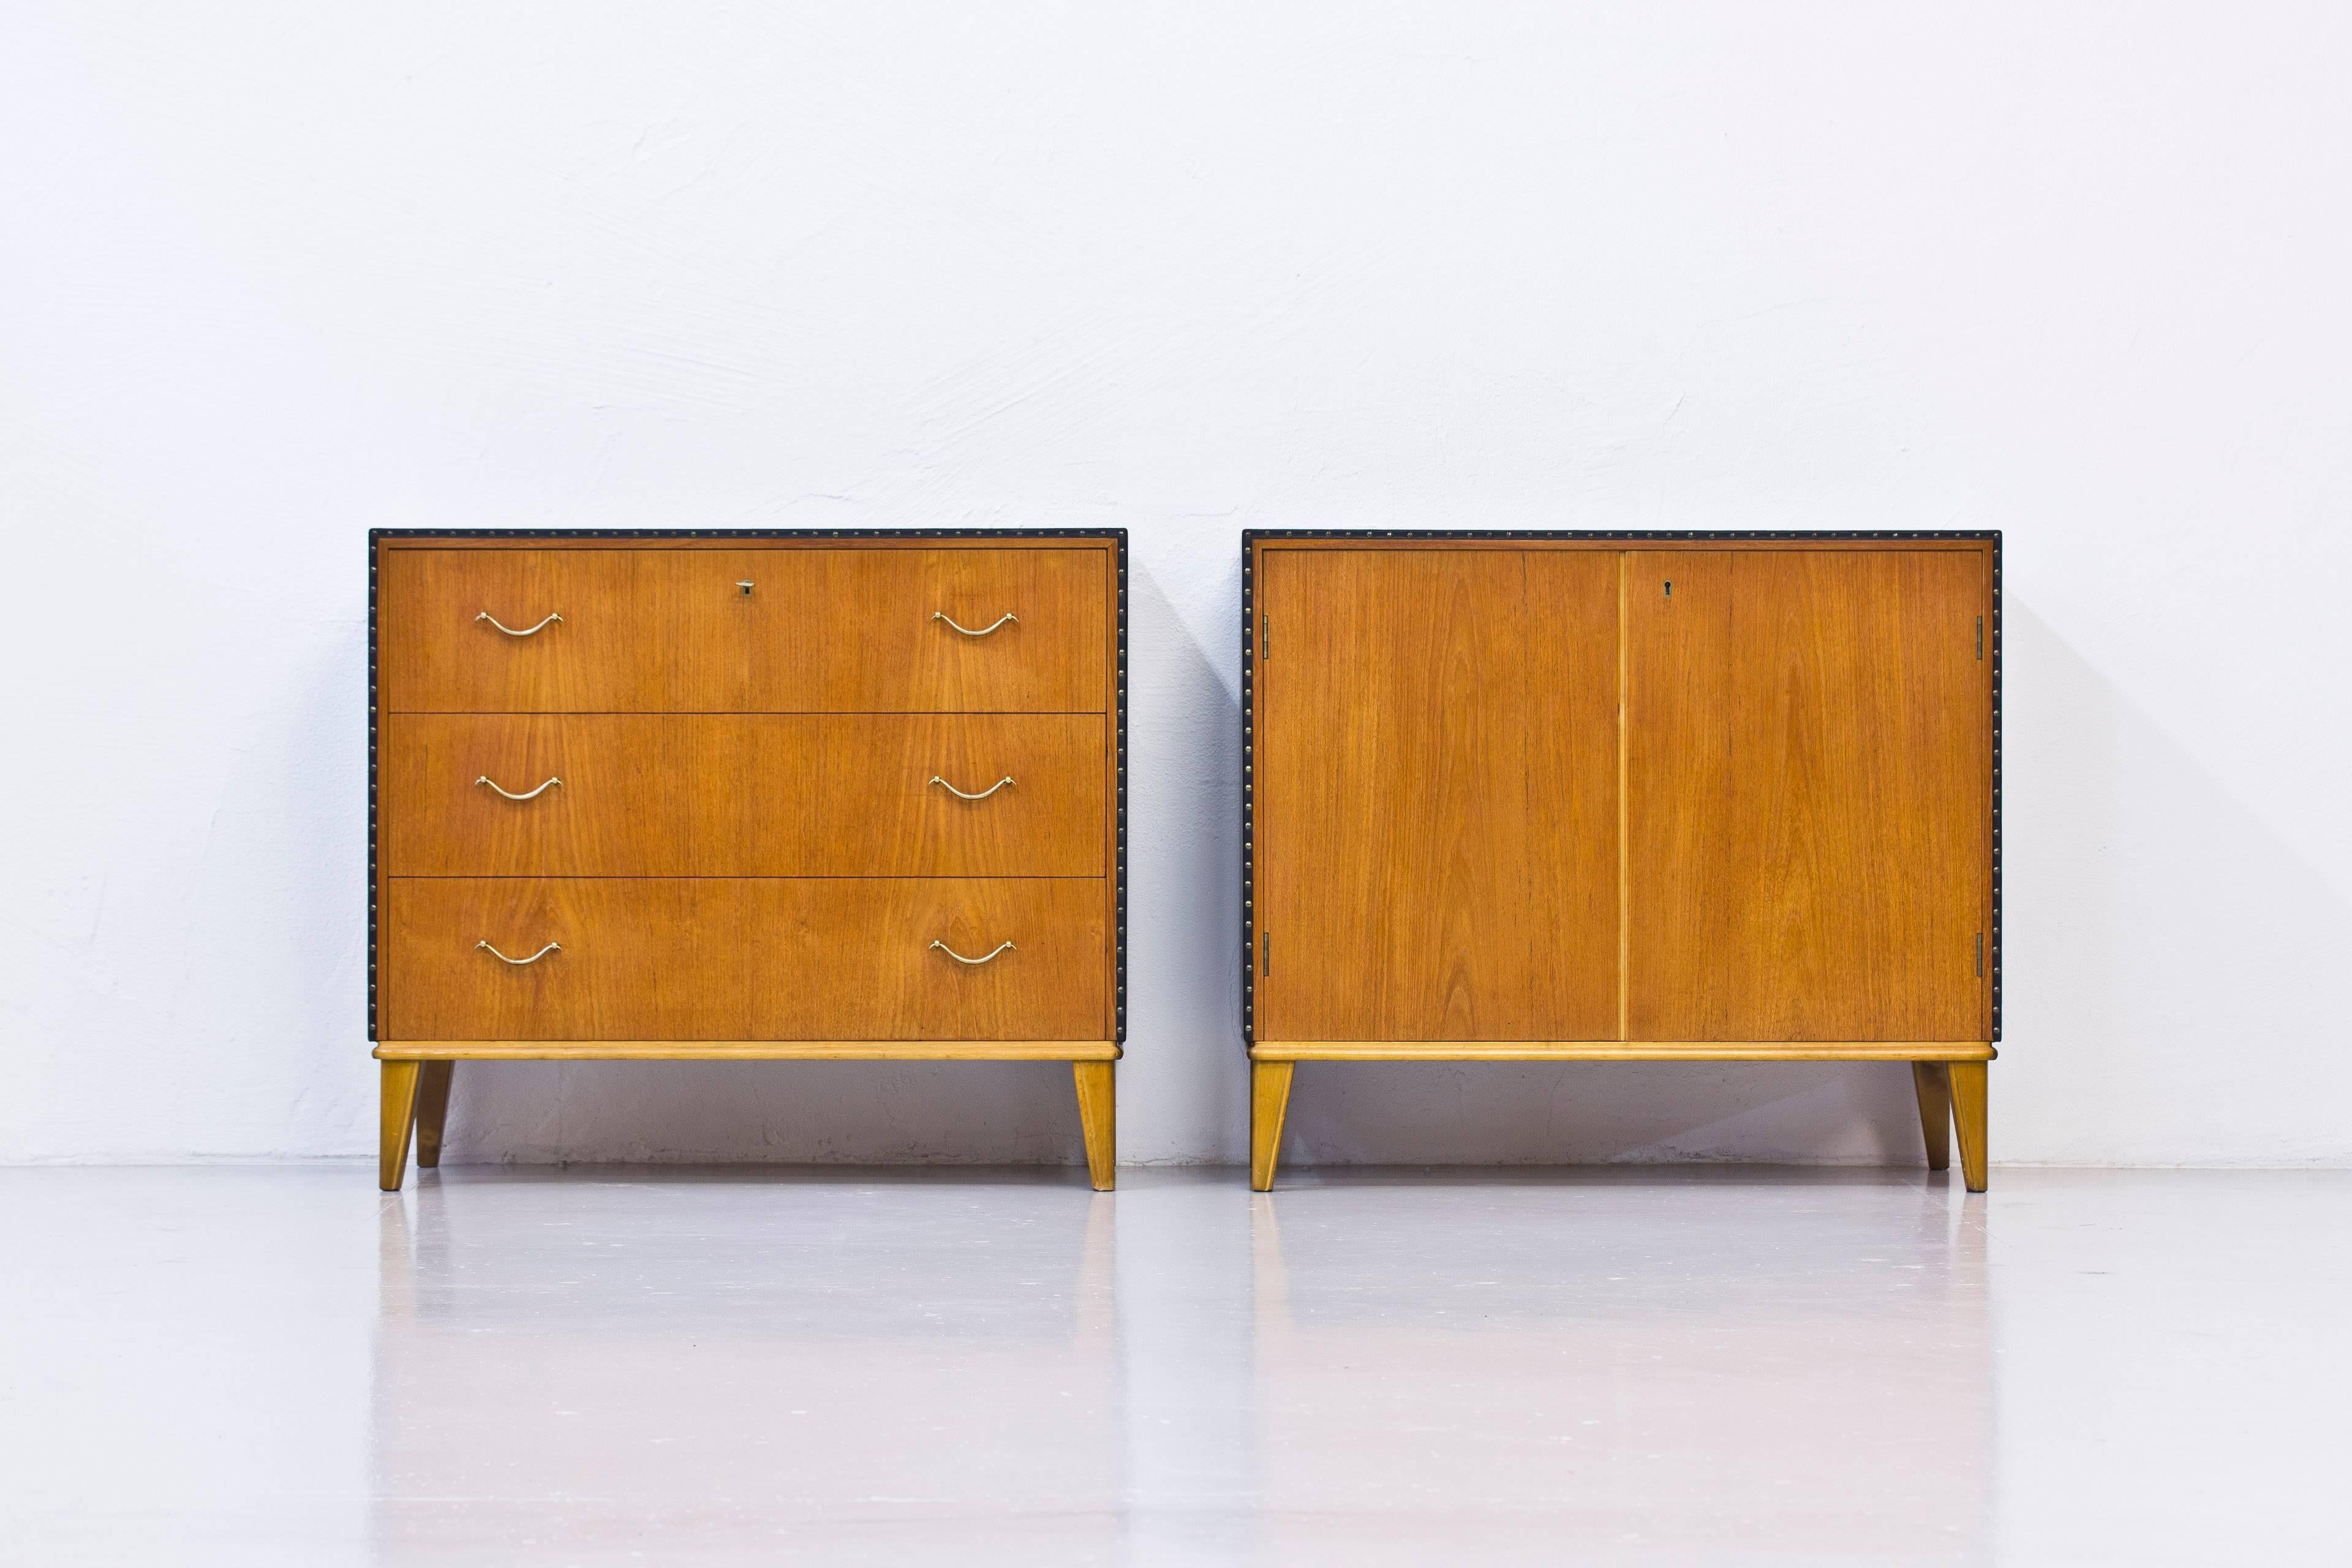 Matching chest of drawers and small cabinet in the style of Swedish designer Otto Schulz. Done in Sweden during the 1940s. Both cabinets with teak on back and the front doors/drawers. Tops and sides upholstered with dark blue faux leather with brass